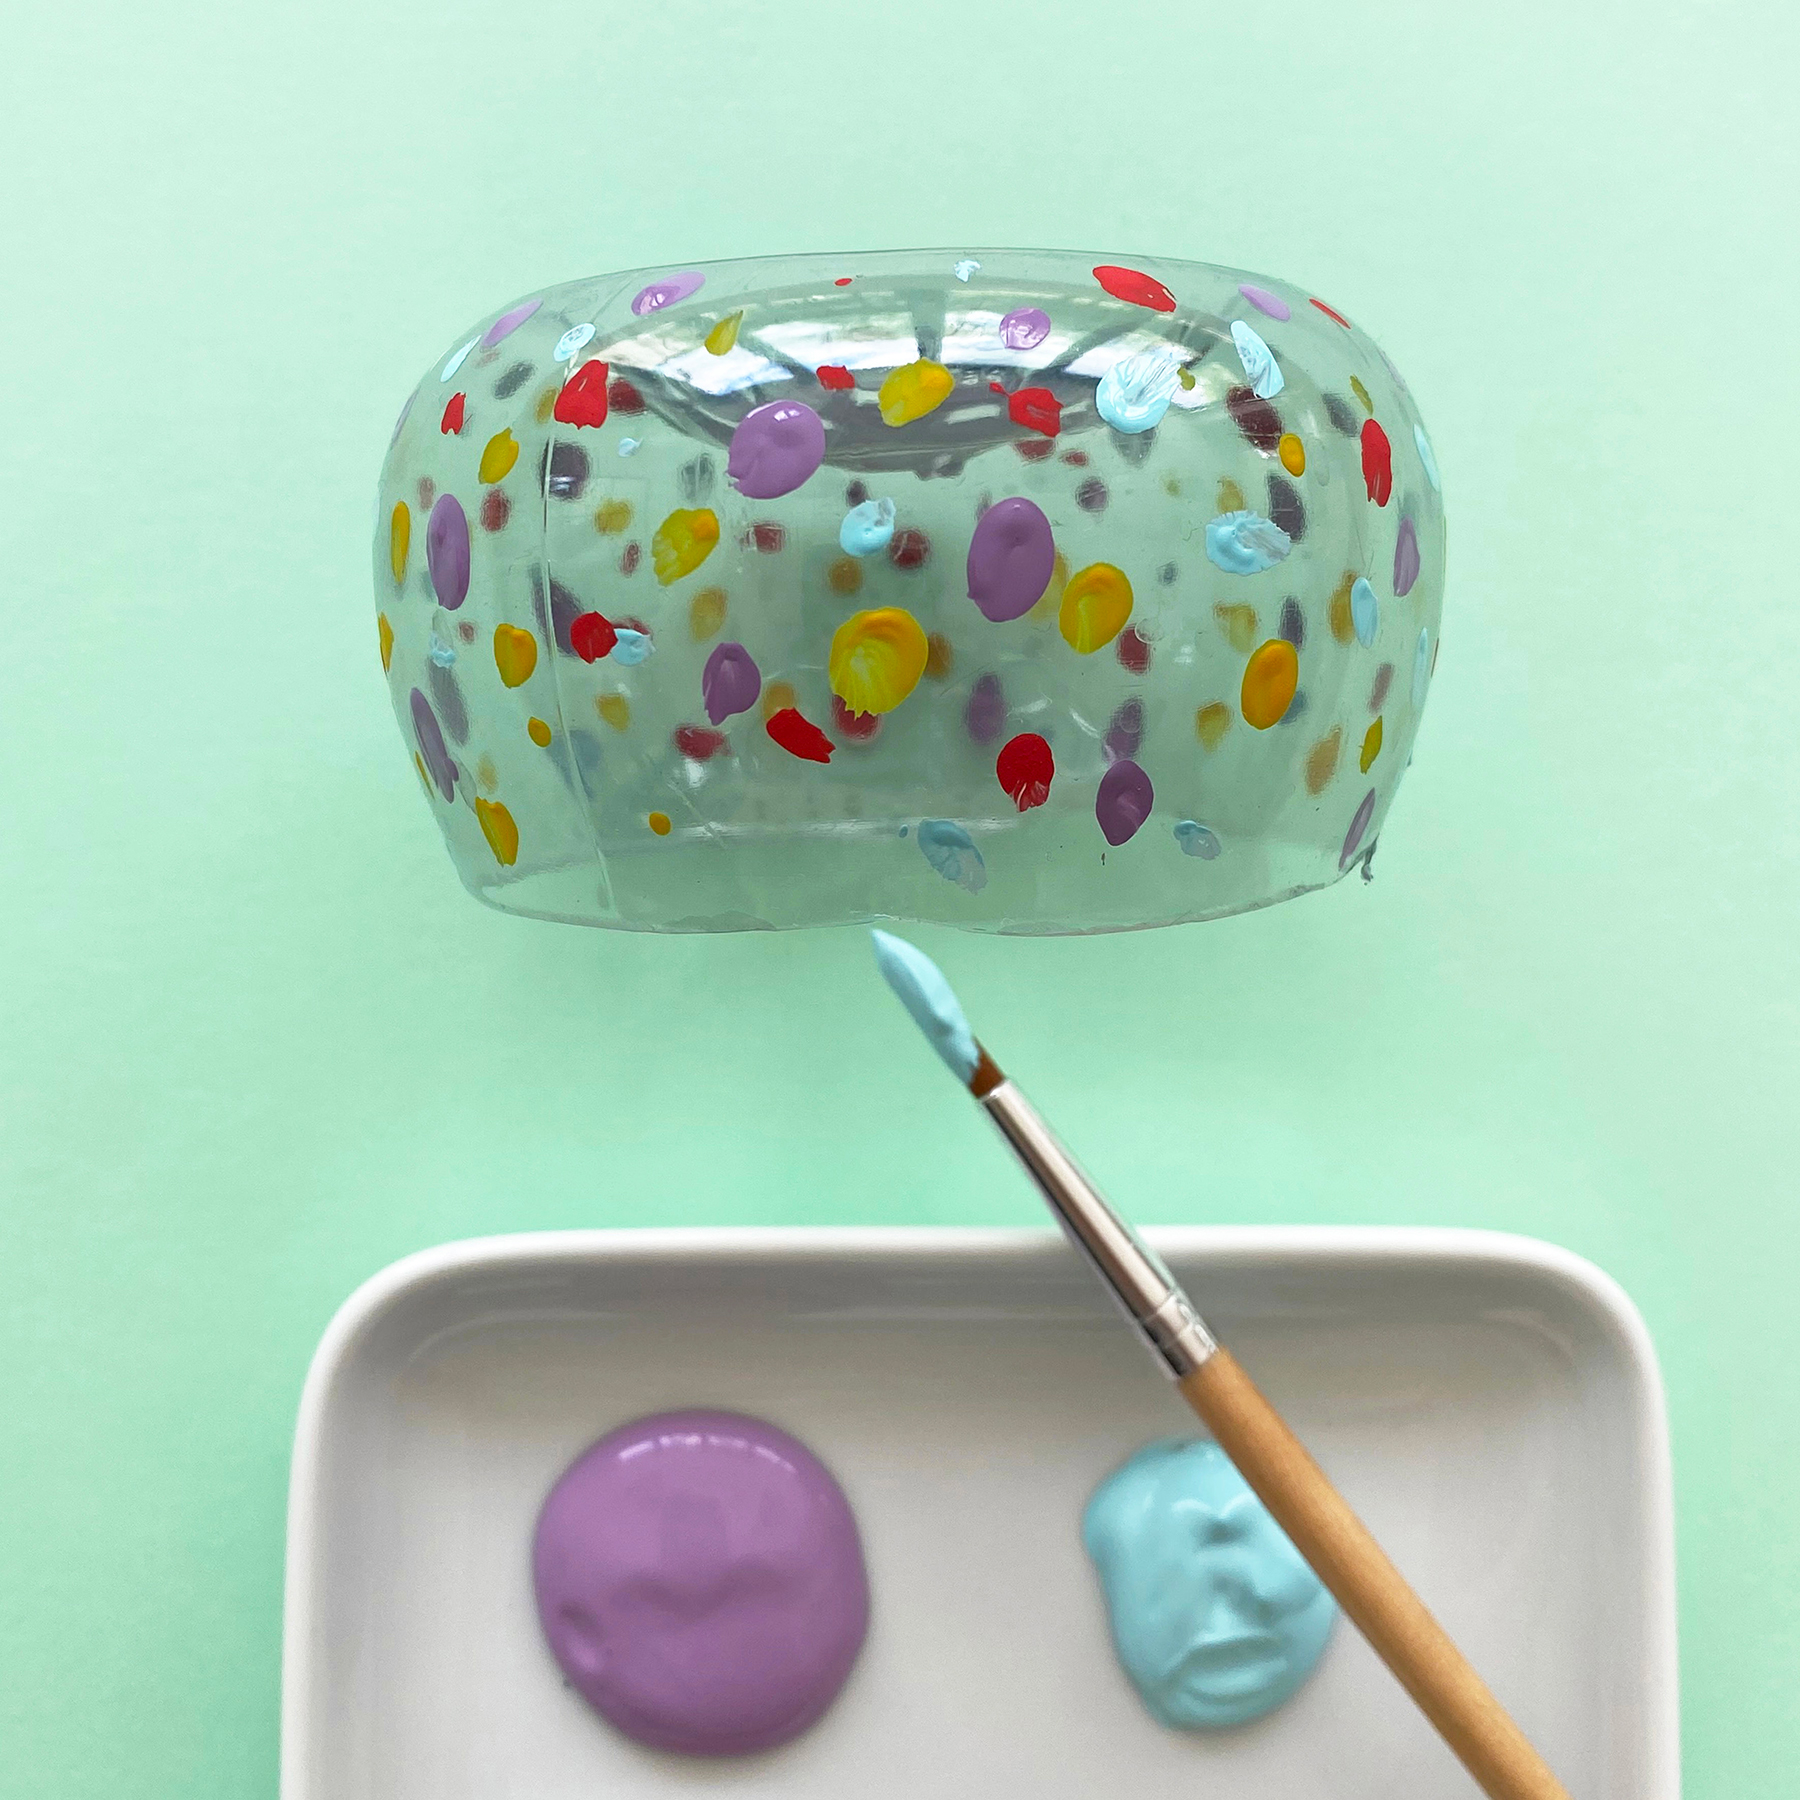 A photo of the bottom of a plastic bottle being painted in different colours alongside a dish of paints and a paintbrush on a mint green background